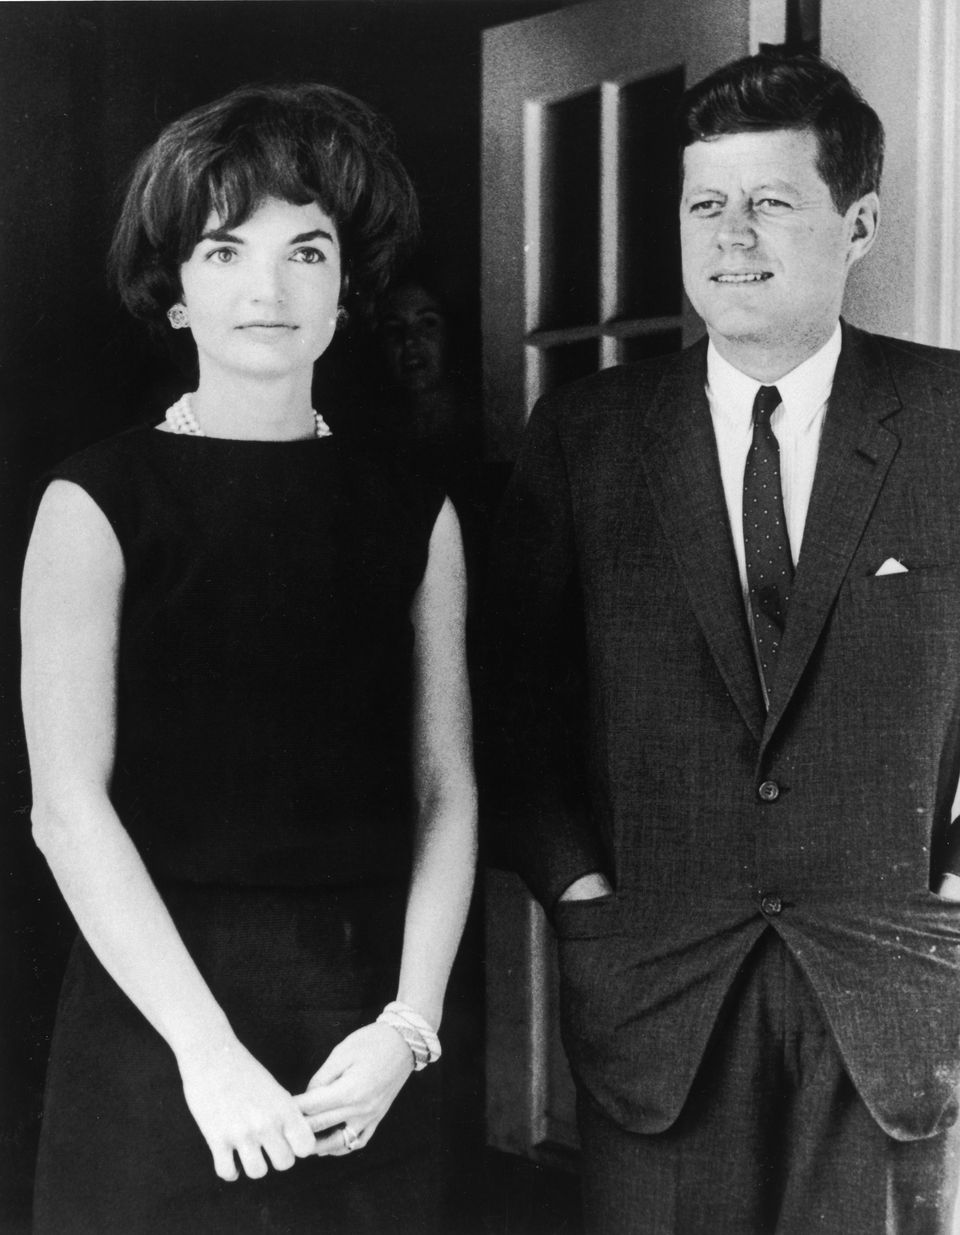 Jacqueline Kennedy (1929 - 1994) stands with her husband, President John F. Kennedy (1917 - 1963), in the door of the White House, Washington, D.C., circa 1961. | Source: Getty Images